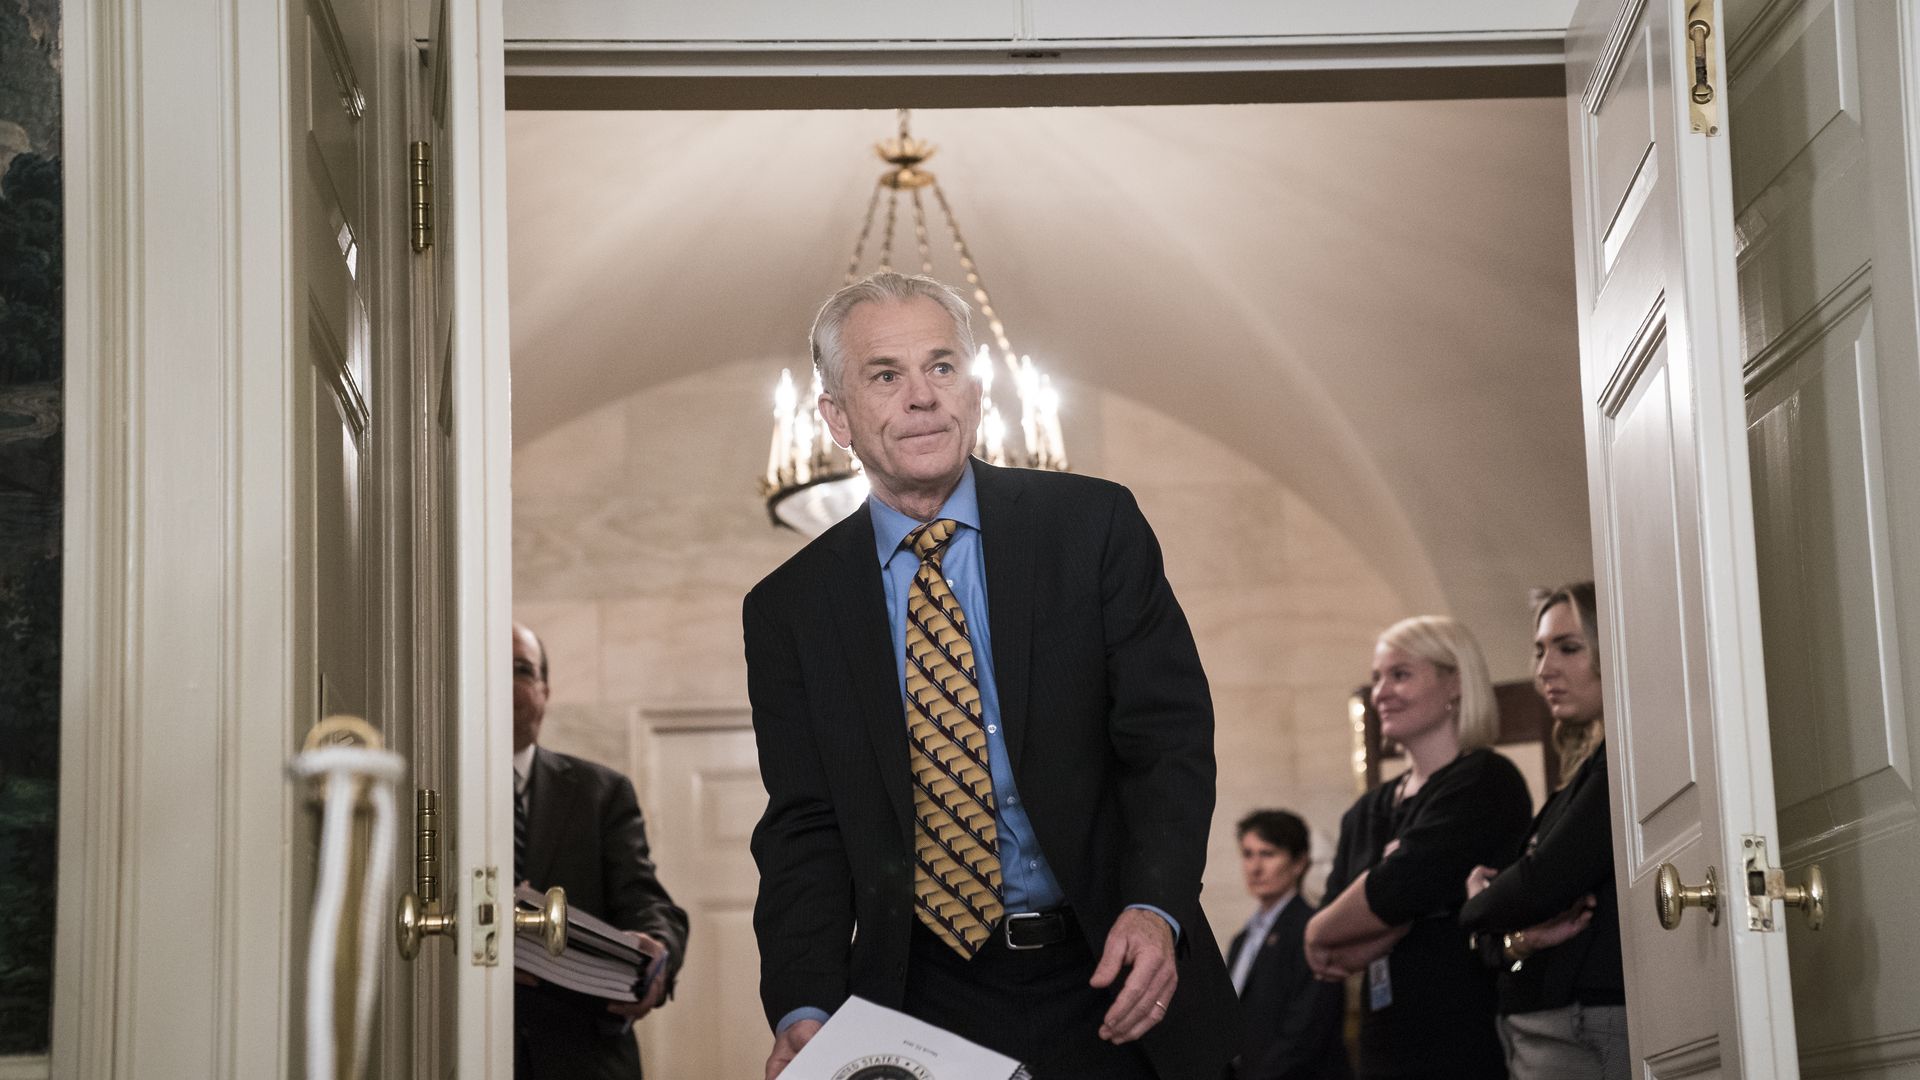 Peter Navarro, Assistant to the President, walks through a door in the White House